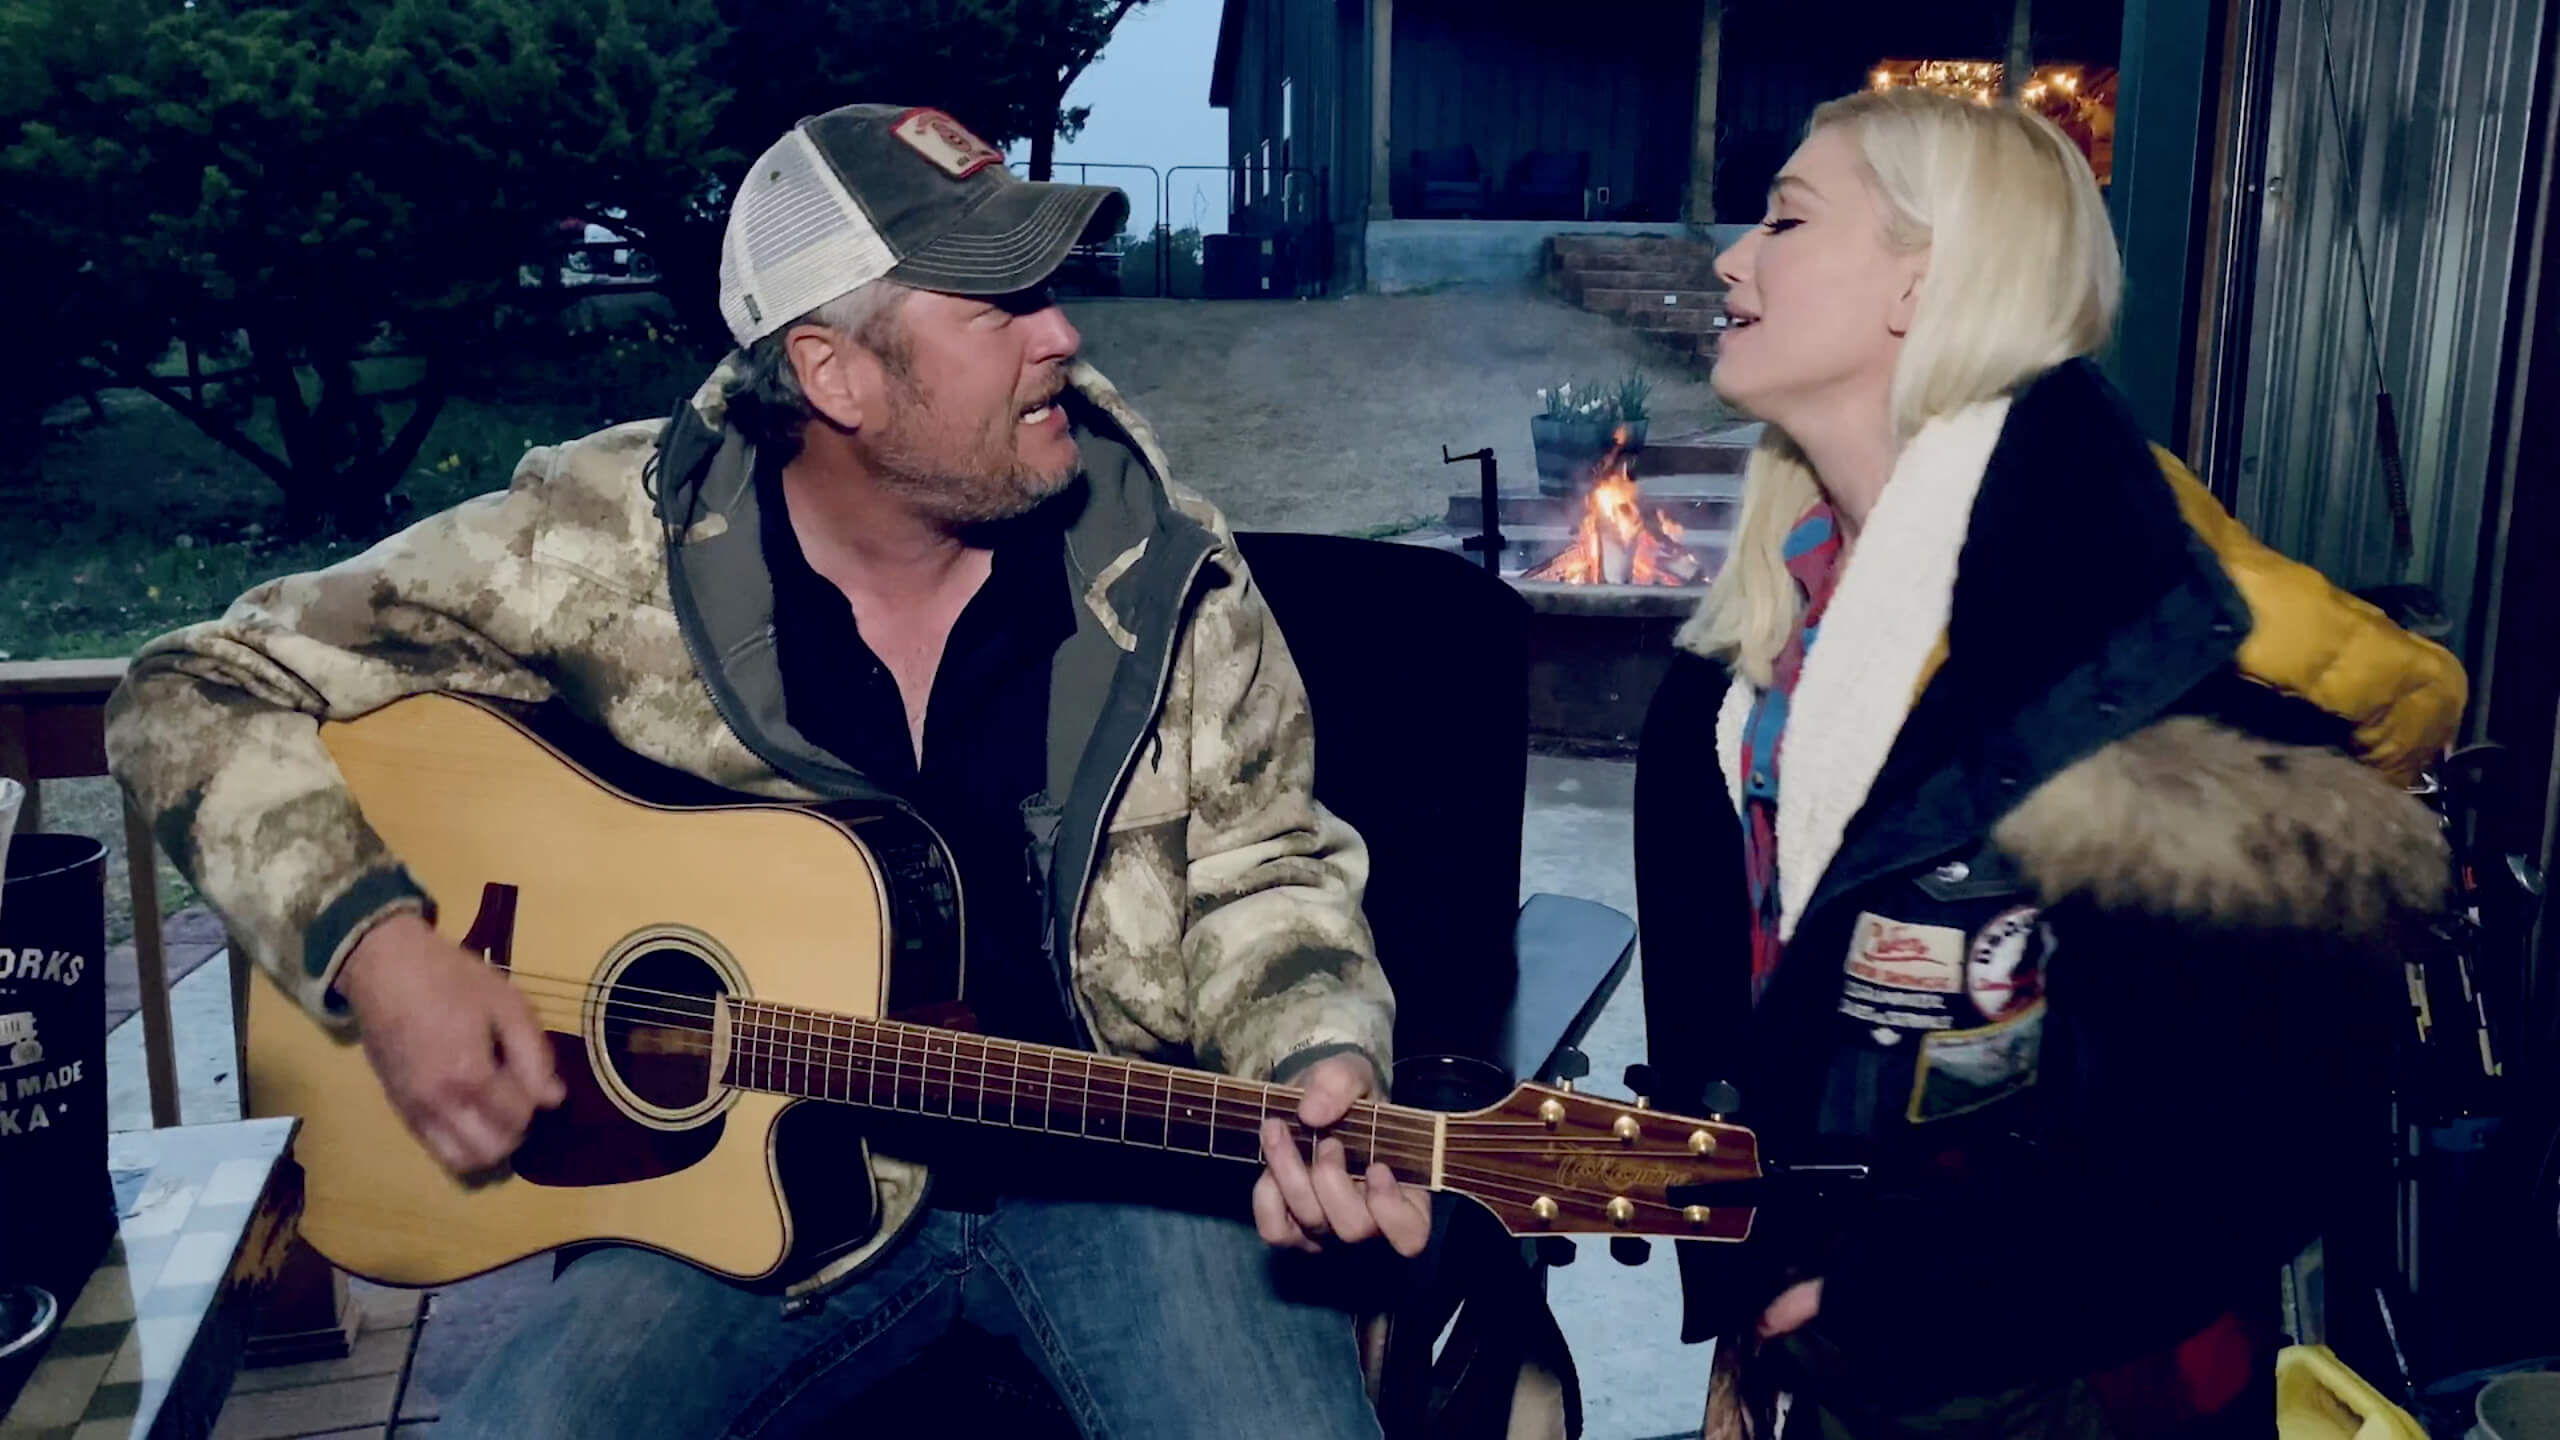 Blake Shelton and Gwen Stefani singing together outside of their Oklahoma country ranch